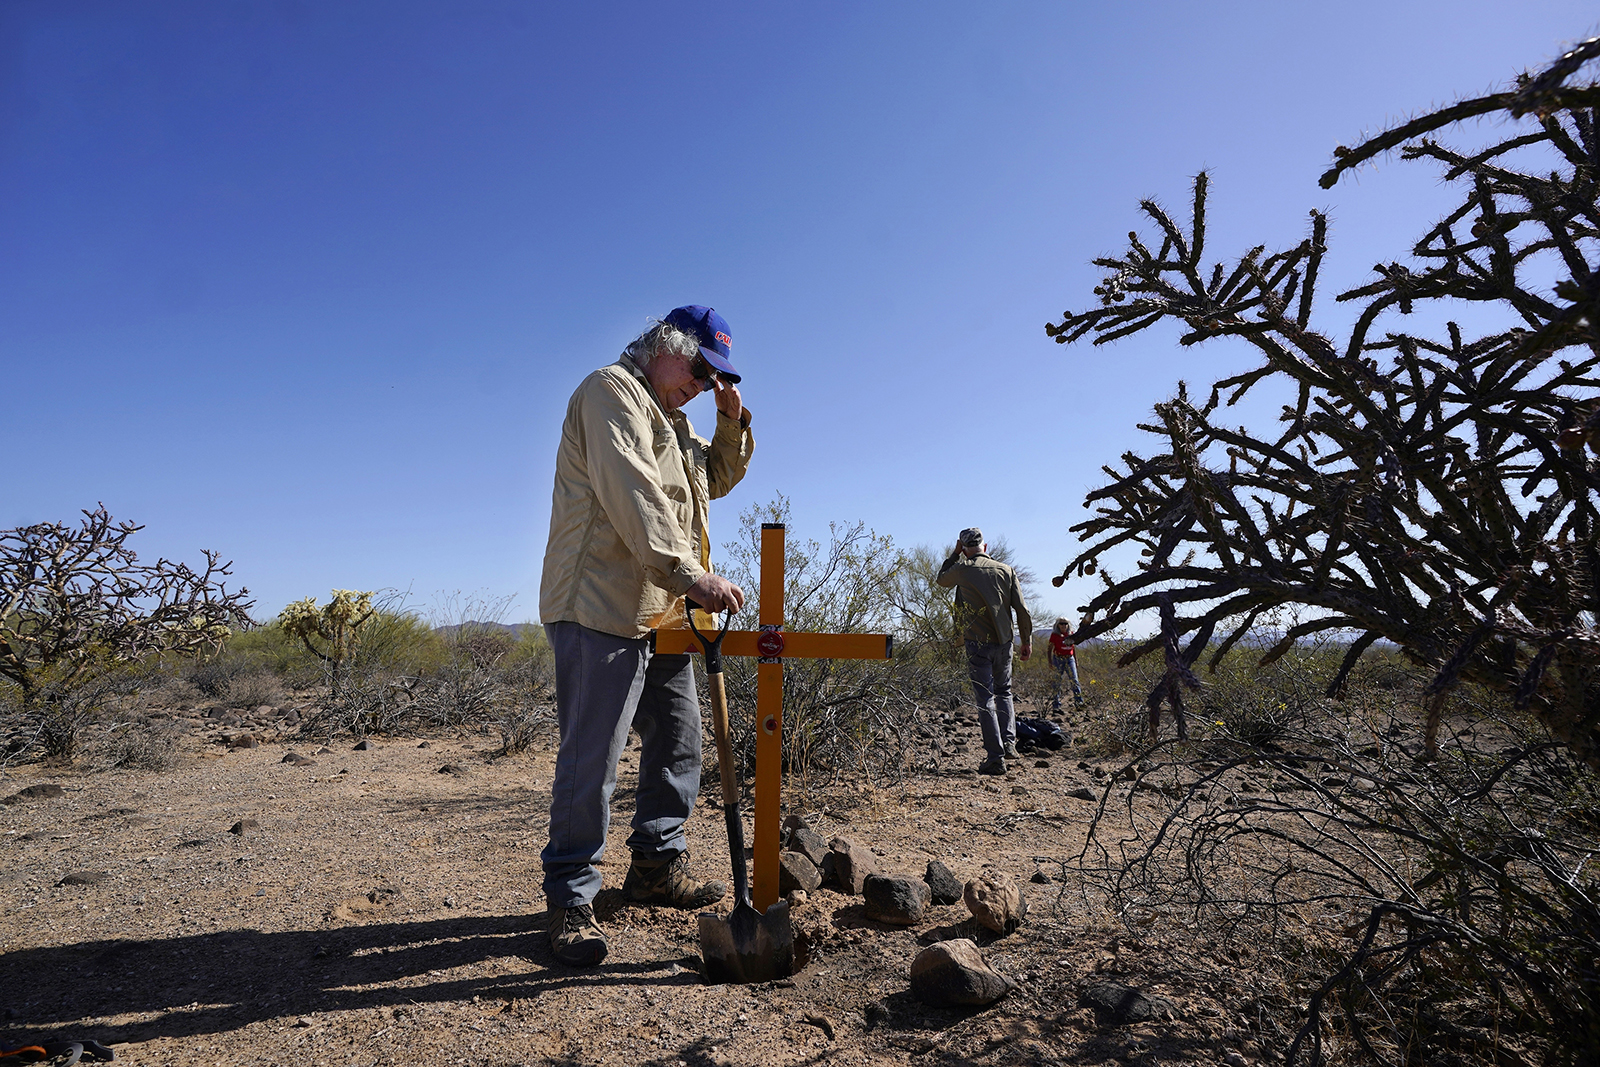 Alvaro Enciso, part of the Tucson Samaritans volunteer group, pauses as he and a group of other volunteers place a new cross at the site of the migrant who died in the desert some time ago, on Tuesday, May 18, 2021, in the desert near Three Points, Ariz. Enciso says he plants three or four crosses each week. “Can you imagine what their families go through, not knowing what happened to them?” (AP Photo/Ross D. Franklin)